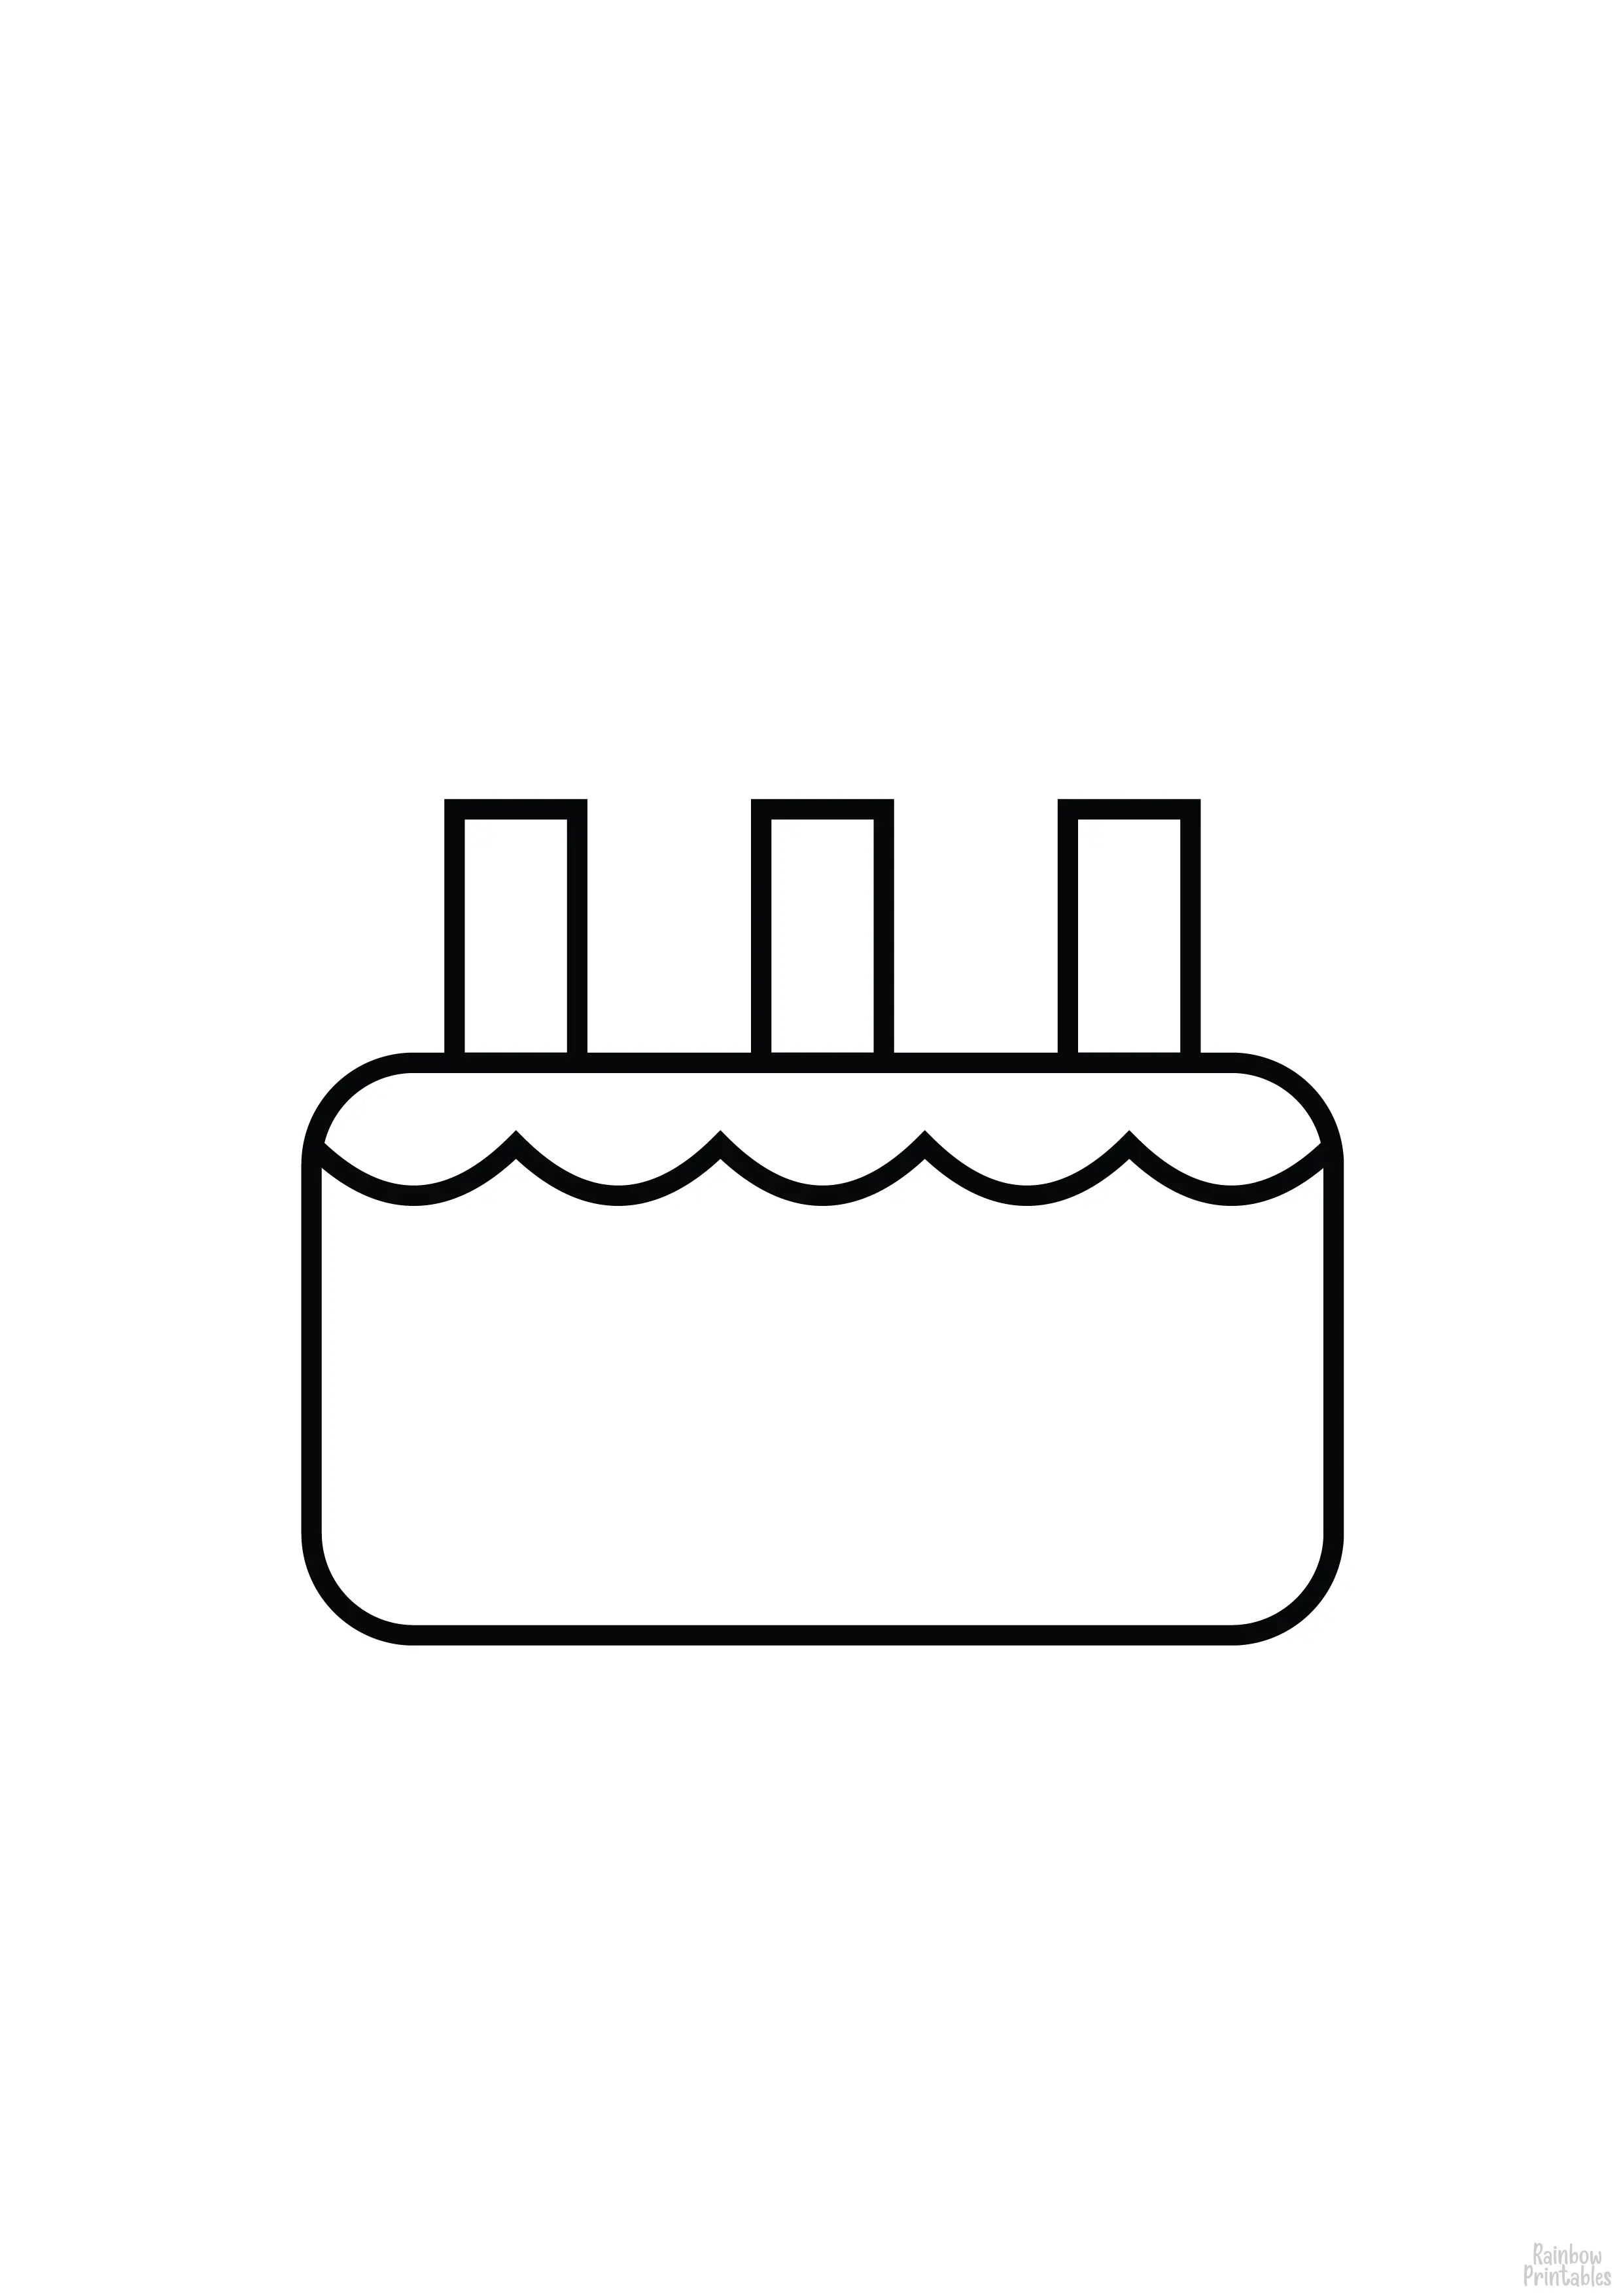 CAKE BIRTHCAKE CANDLE NO FLAME Clipart Coloring Pages Line Art Drawings for Kids-01